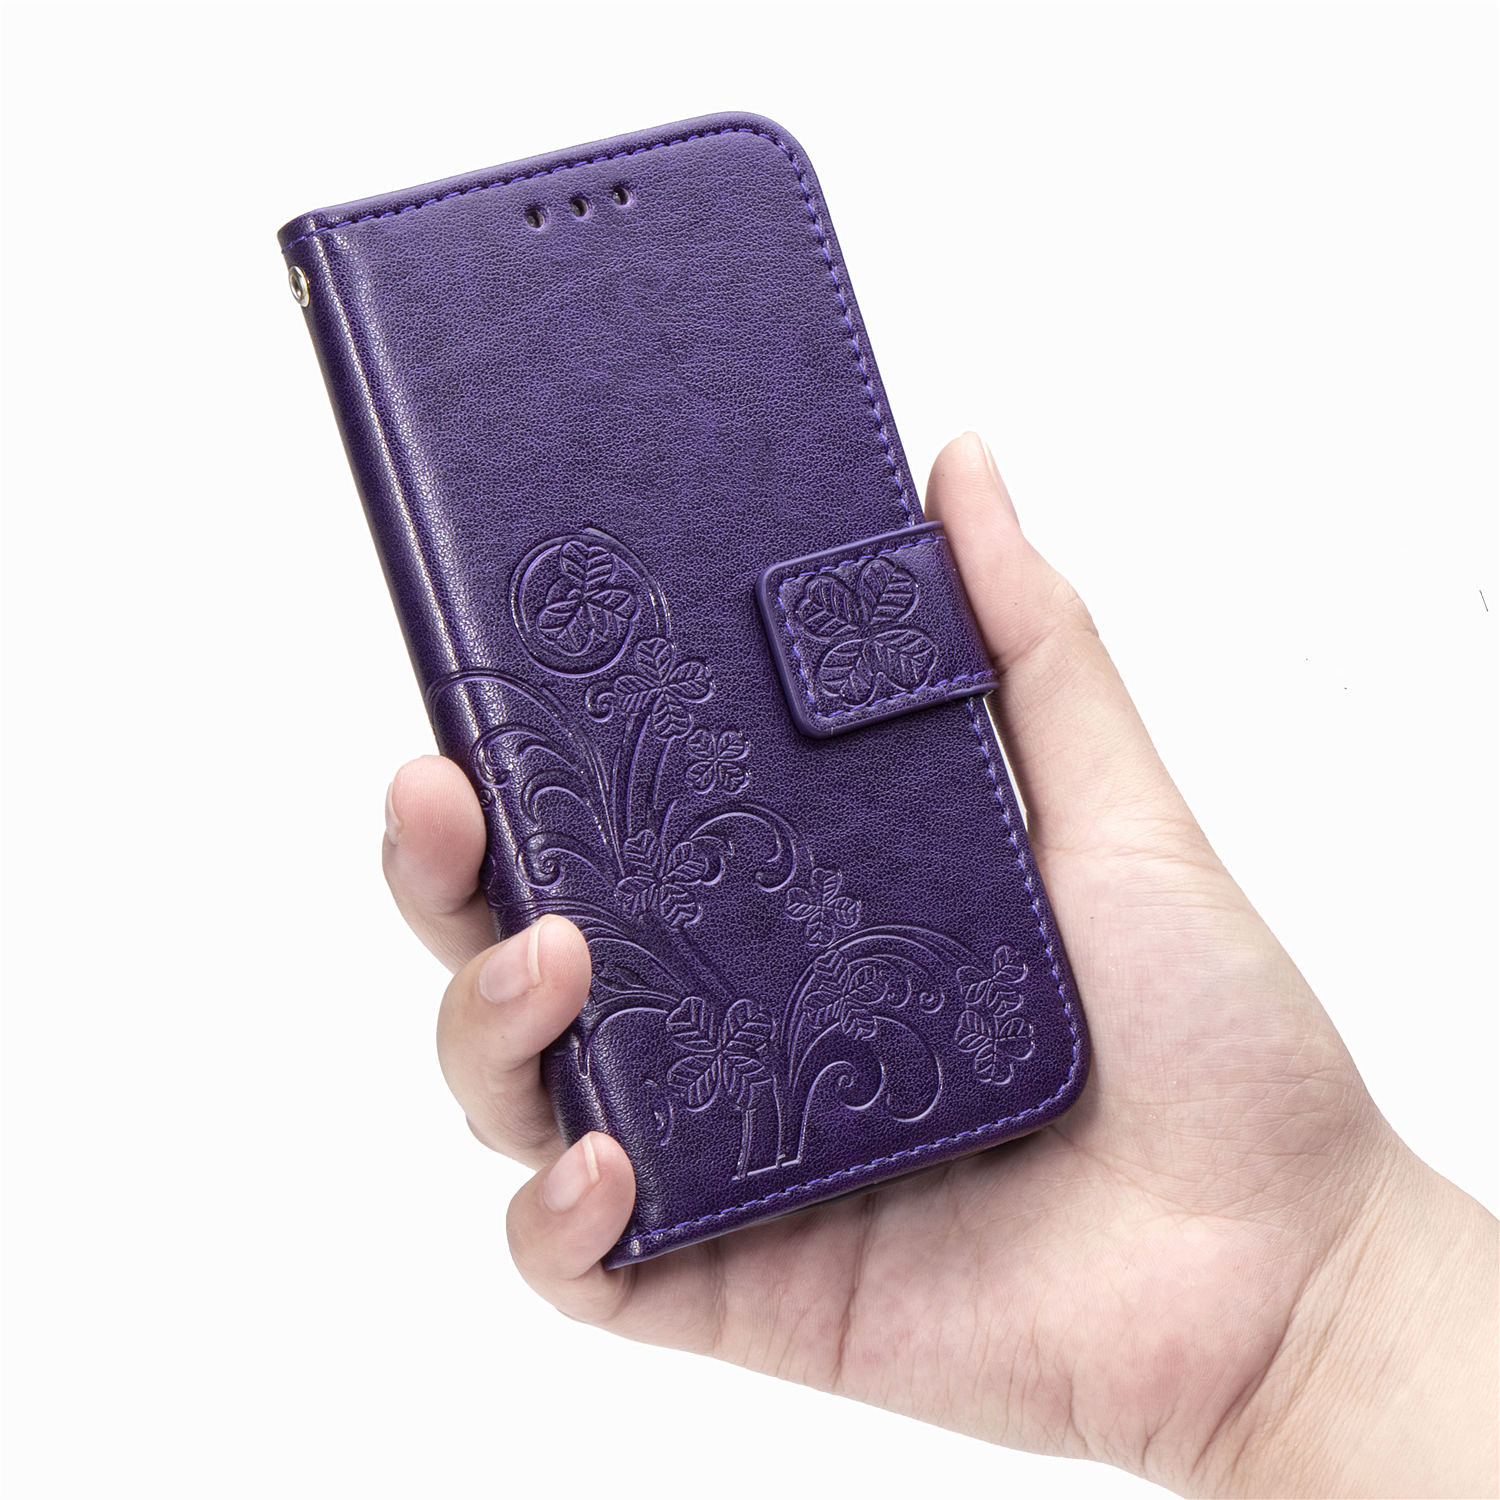 casing Xiaomi Mi 10 Pro 10 lite Redmi Note 9 Pro Max Oversea 4G  PU Phone case four leaf clover flower Bumper Flip Leather Protective Support Cover Magnetic Wallet card slot blue pink gray purple red